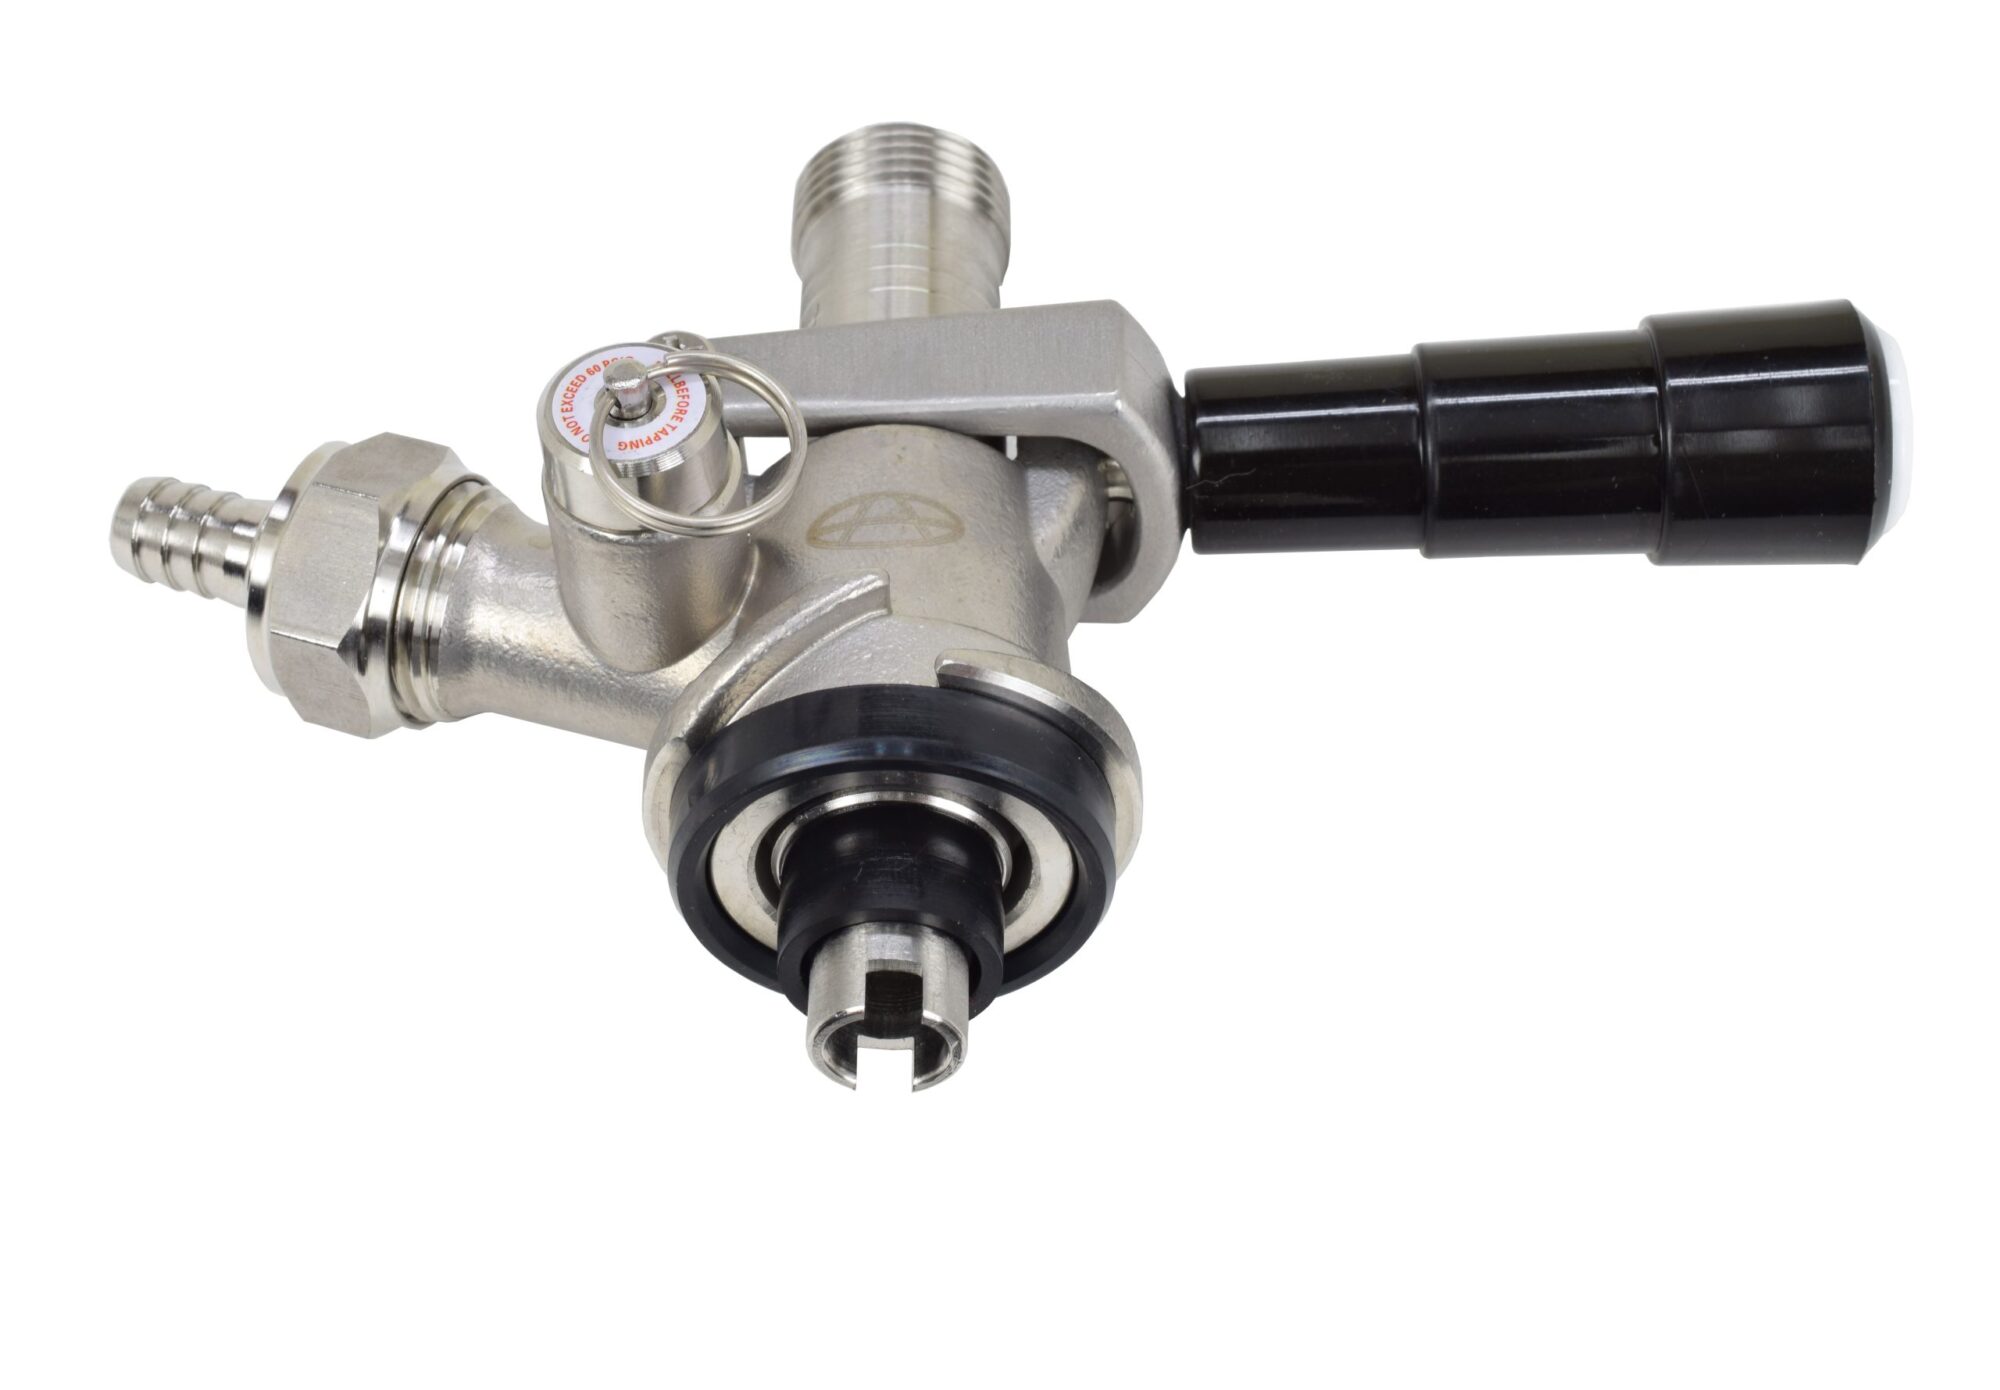 55ESS-X-Bottom "S" Style Keg Coupler with a 304 Stainless Steel Body and Probe